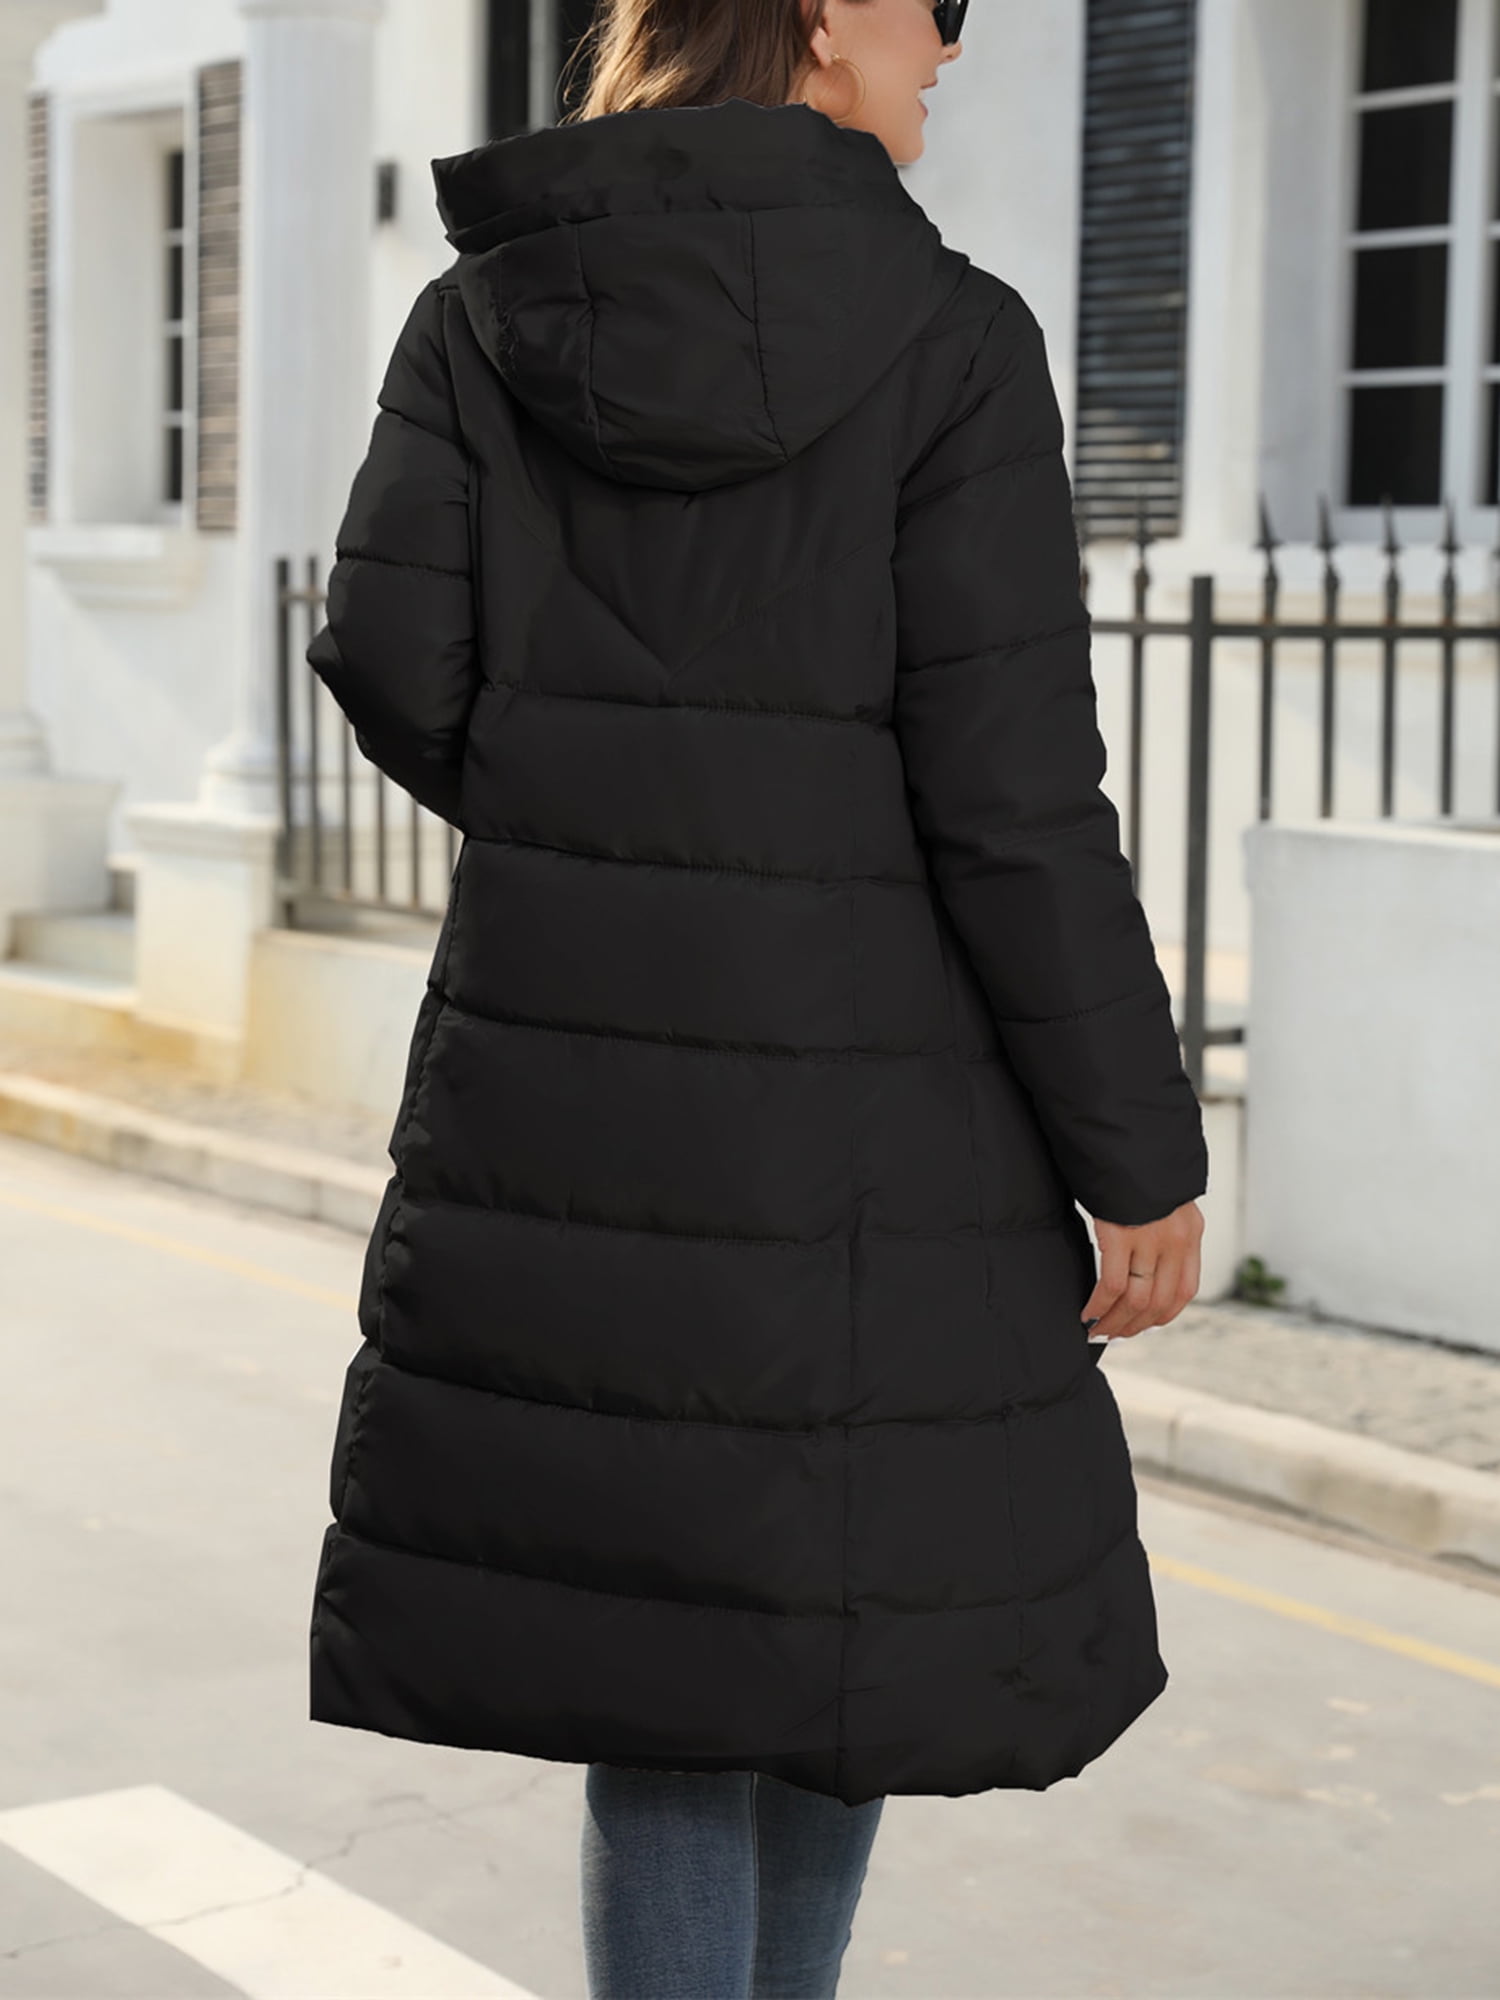  SHOPESSA Womens Quilted Long Coat Long Length Hooded Belted  Puffer Coat Winter Jackets for Women Casual My Orders Placed Recently By Me  termicos mujer frio extremo Black Friday Deals 2023 